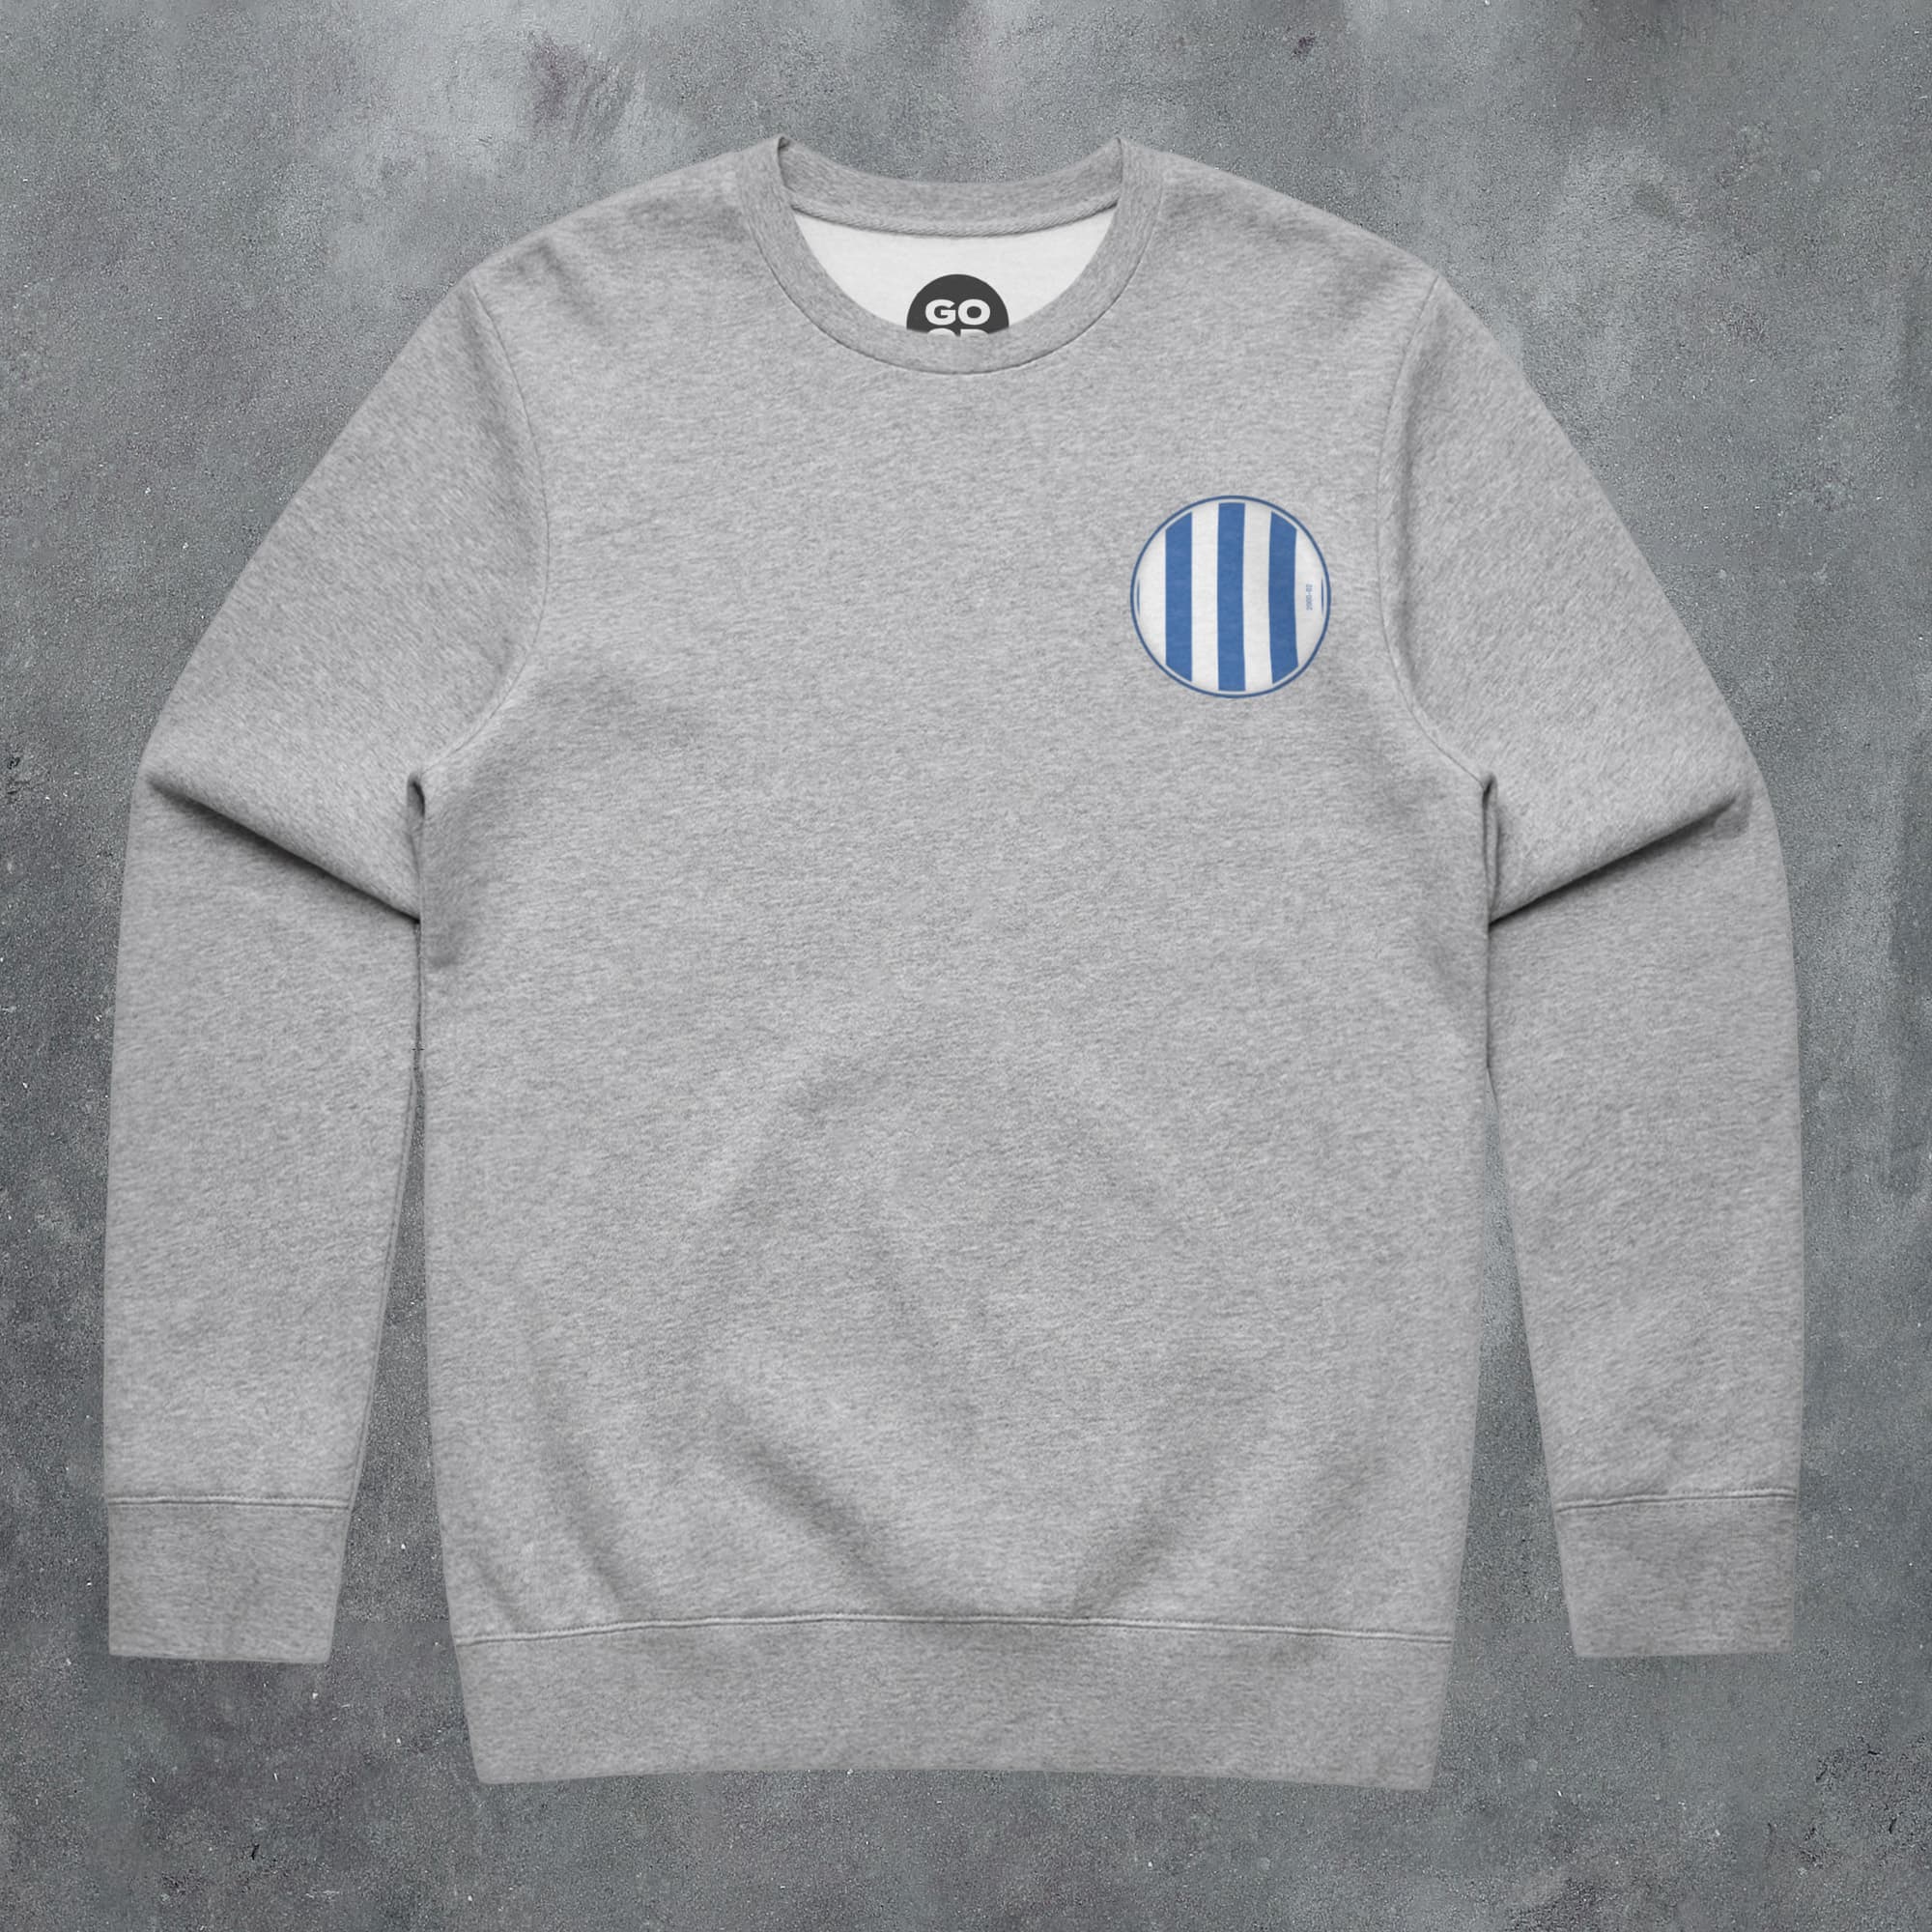 a grey sweatshirt with a blue and white striped pocket